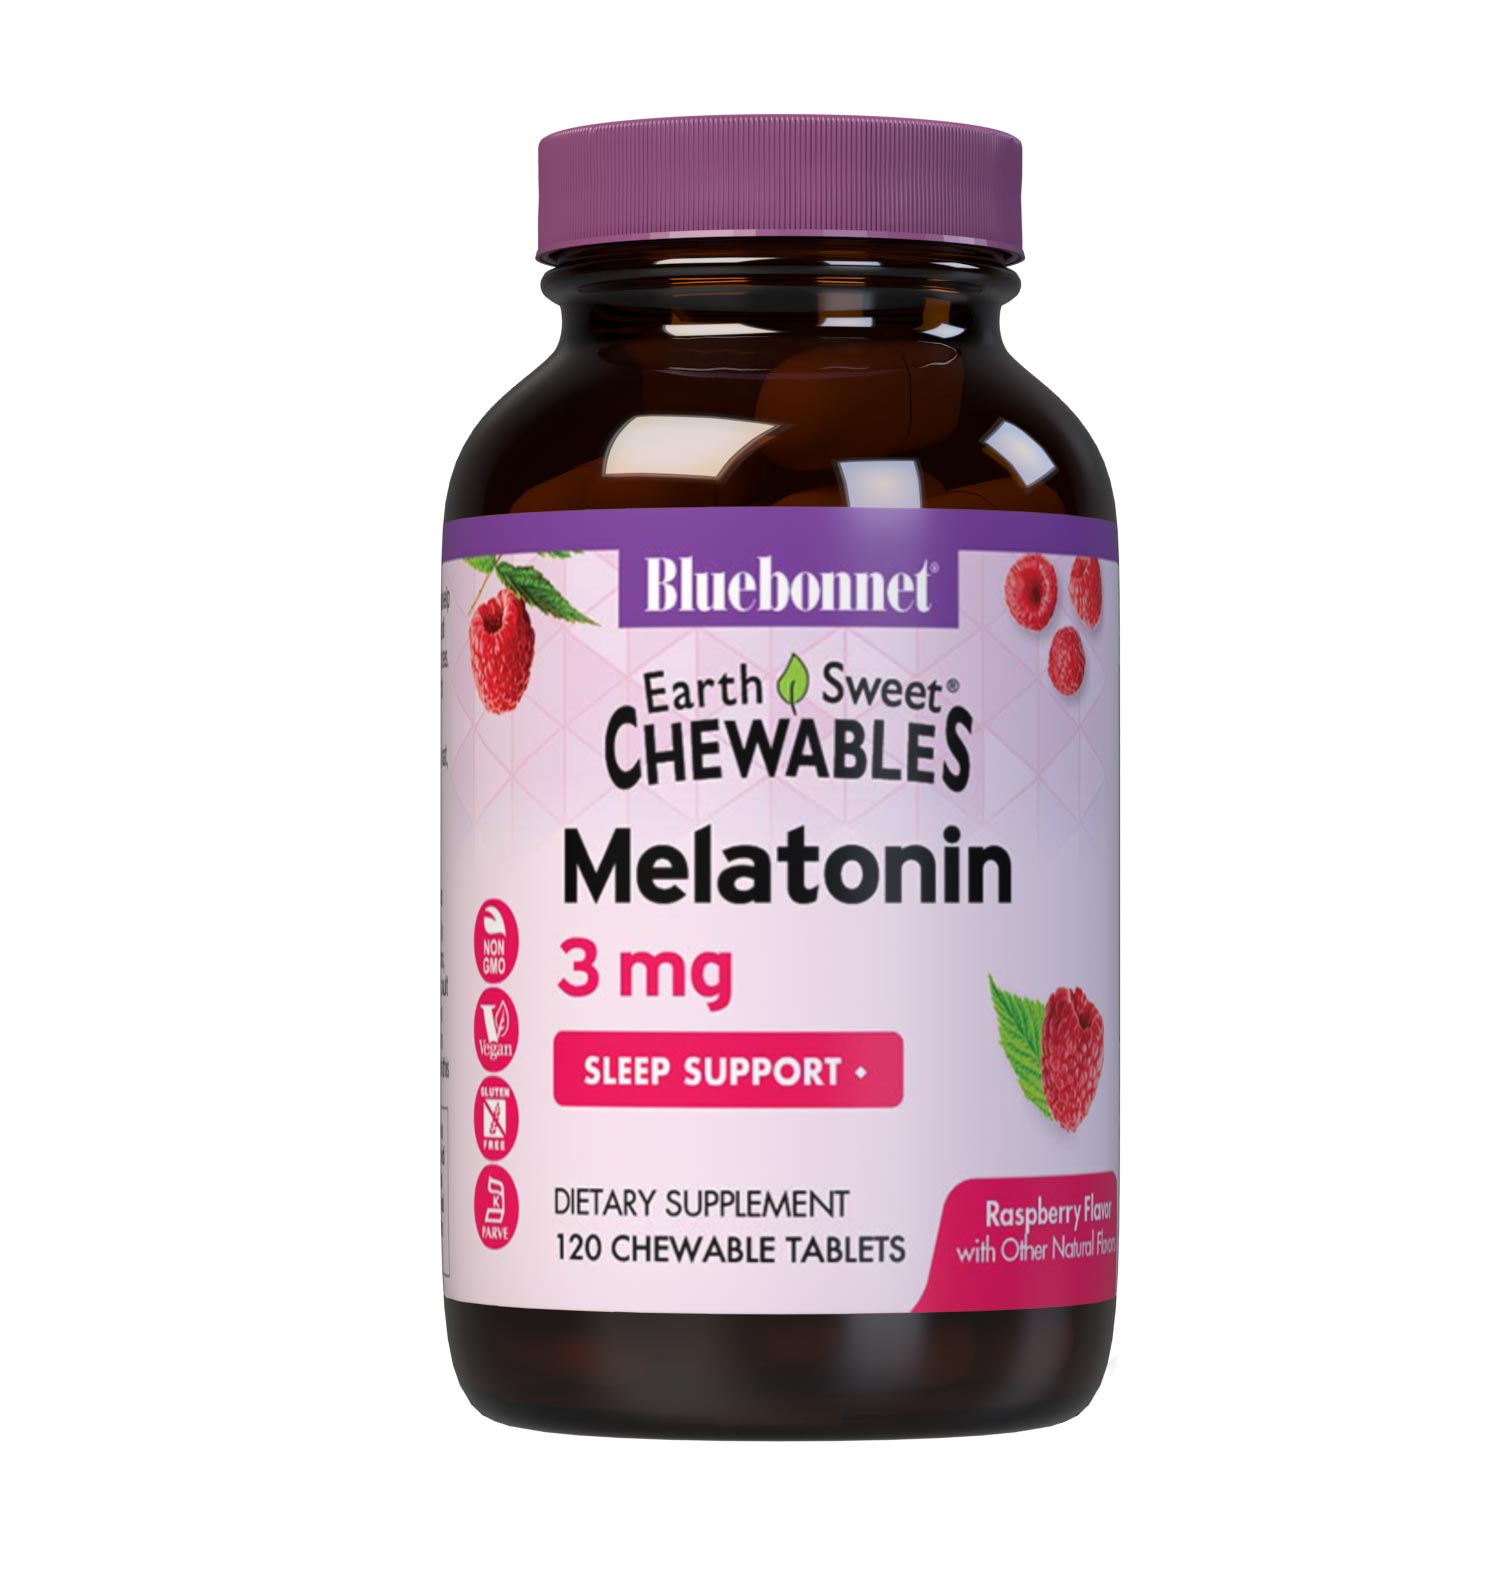 Bluebonnet’s EarthSweet Chewables Melatonin 3 mg 120 Tablets help to minimize occasional sleeplessness for those affected by disturbed sleep/wake cycles, such as those traveling across multiple time zones. This product is sweetened with EarthSweet, a proprietary mix of juice concentrates and cane crystals. #size_120 count